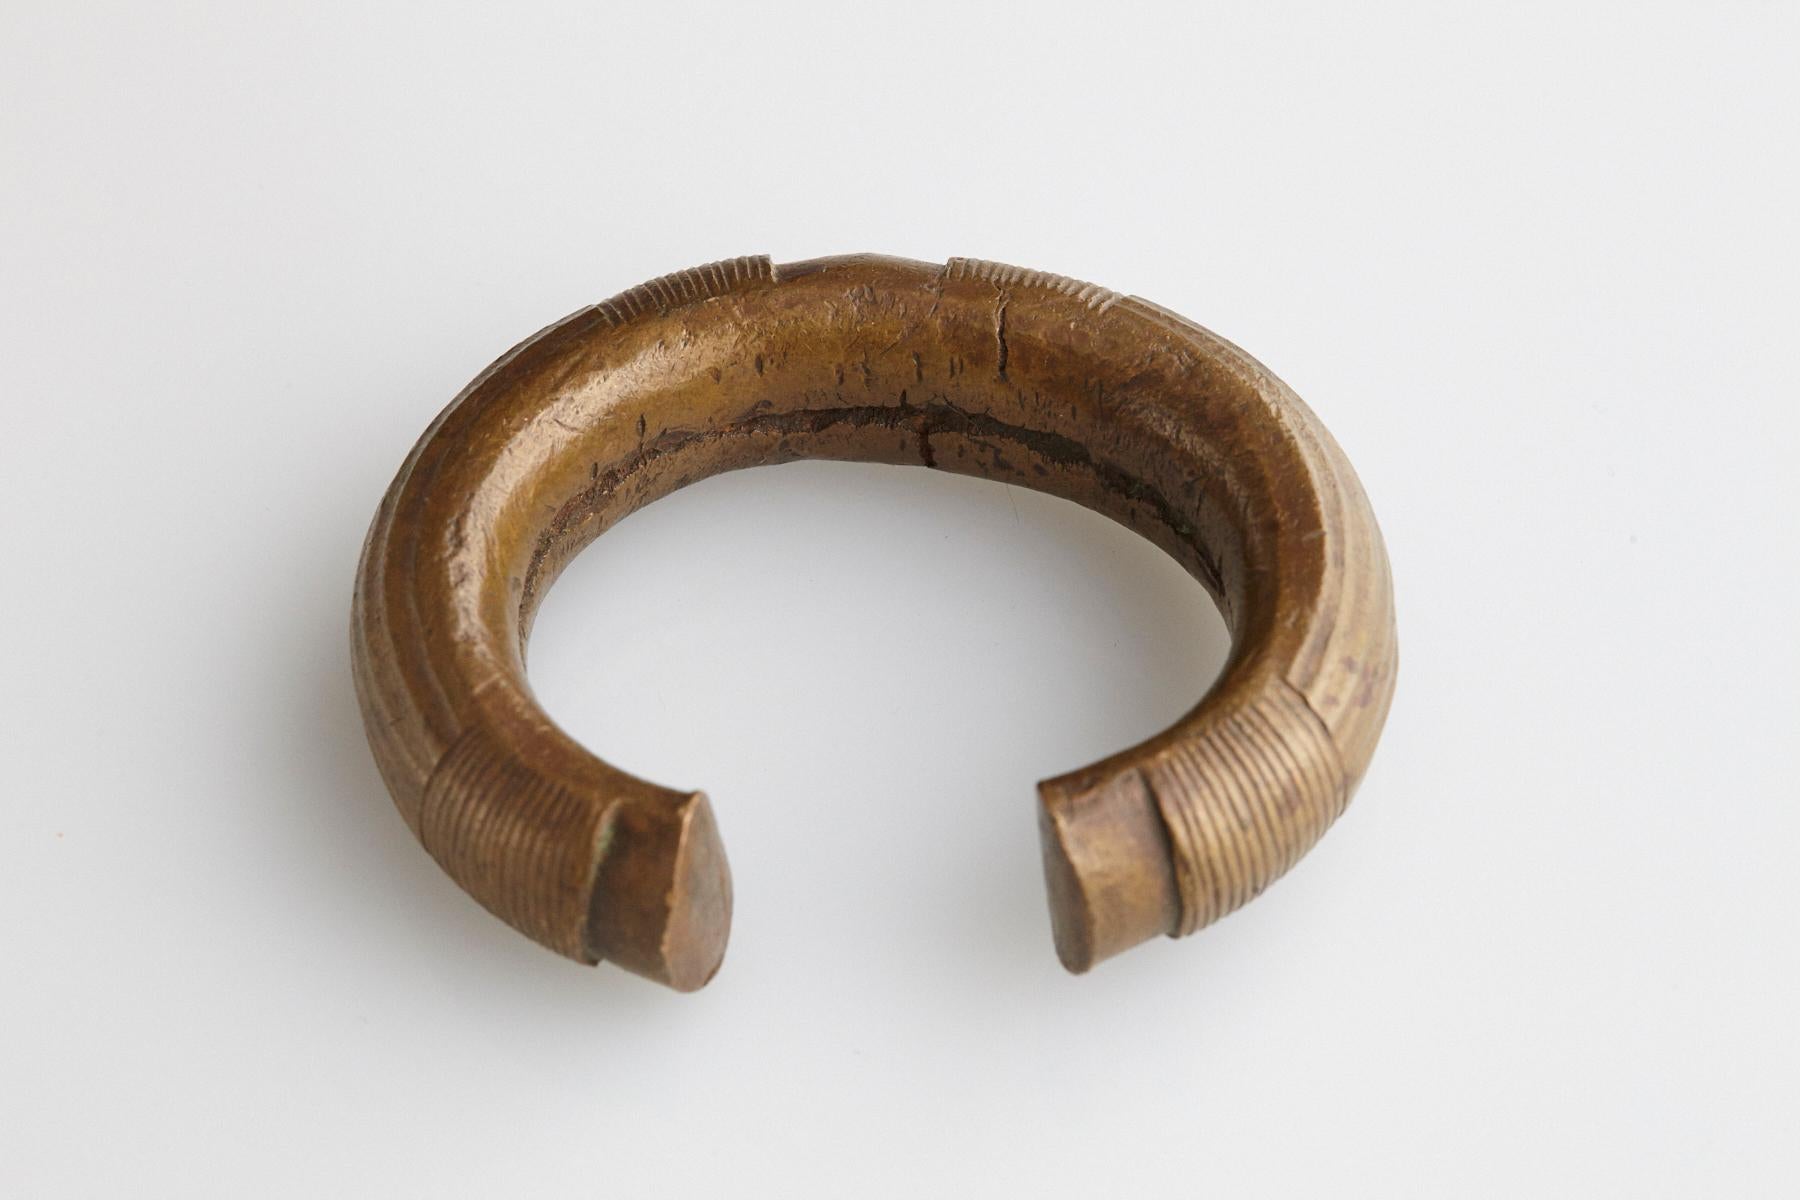 Bronze Currency Bracelet/Manilla, Dogon People, Burkina Faso, 19th c. - No 2 For Sale 2